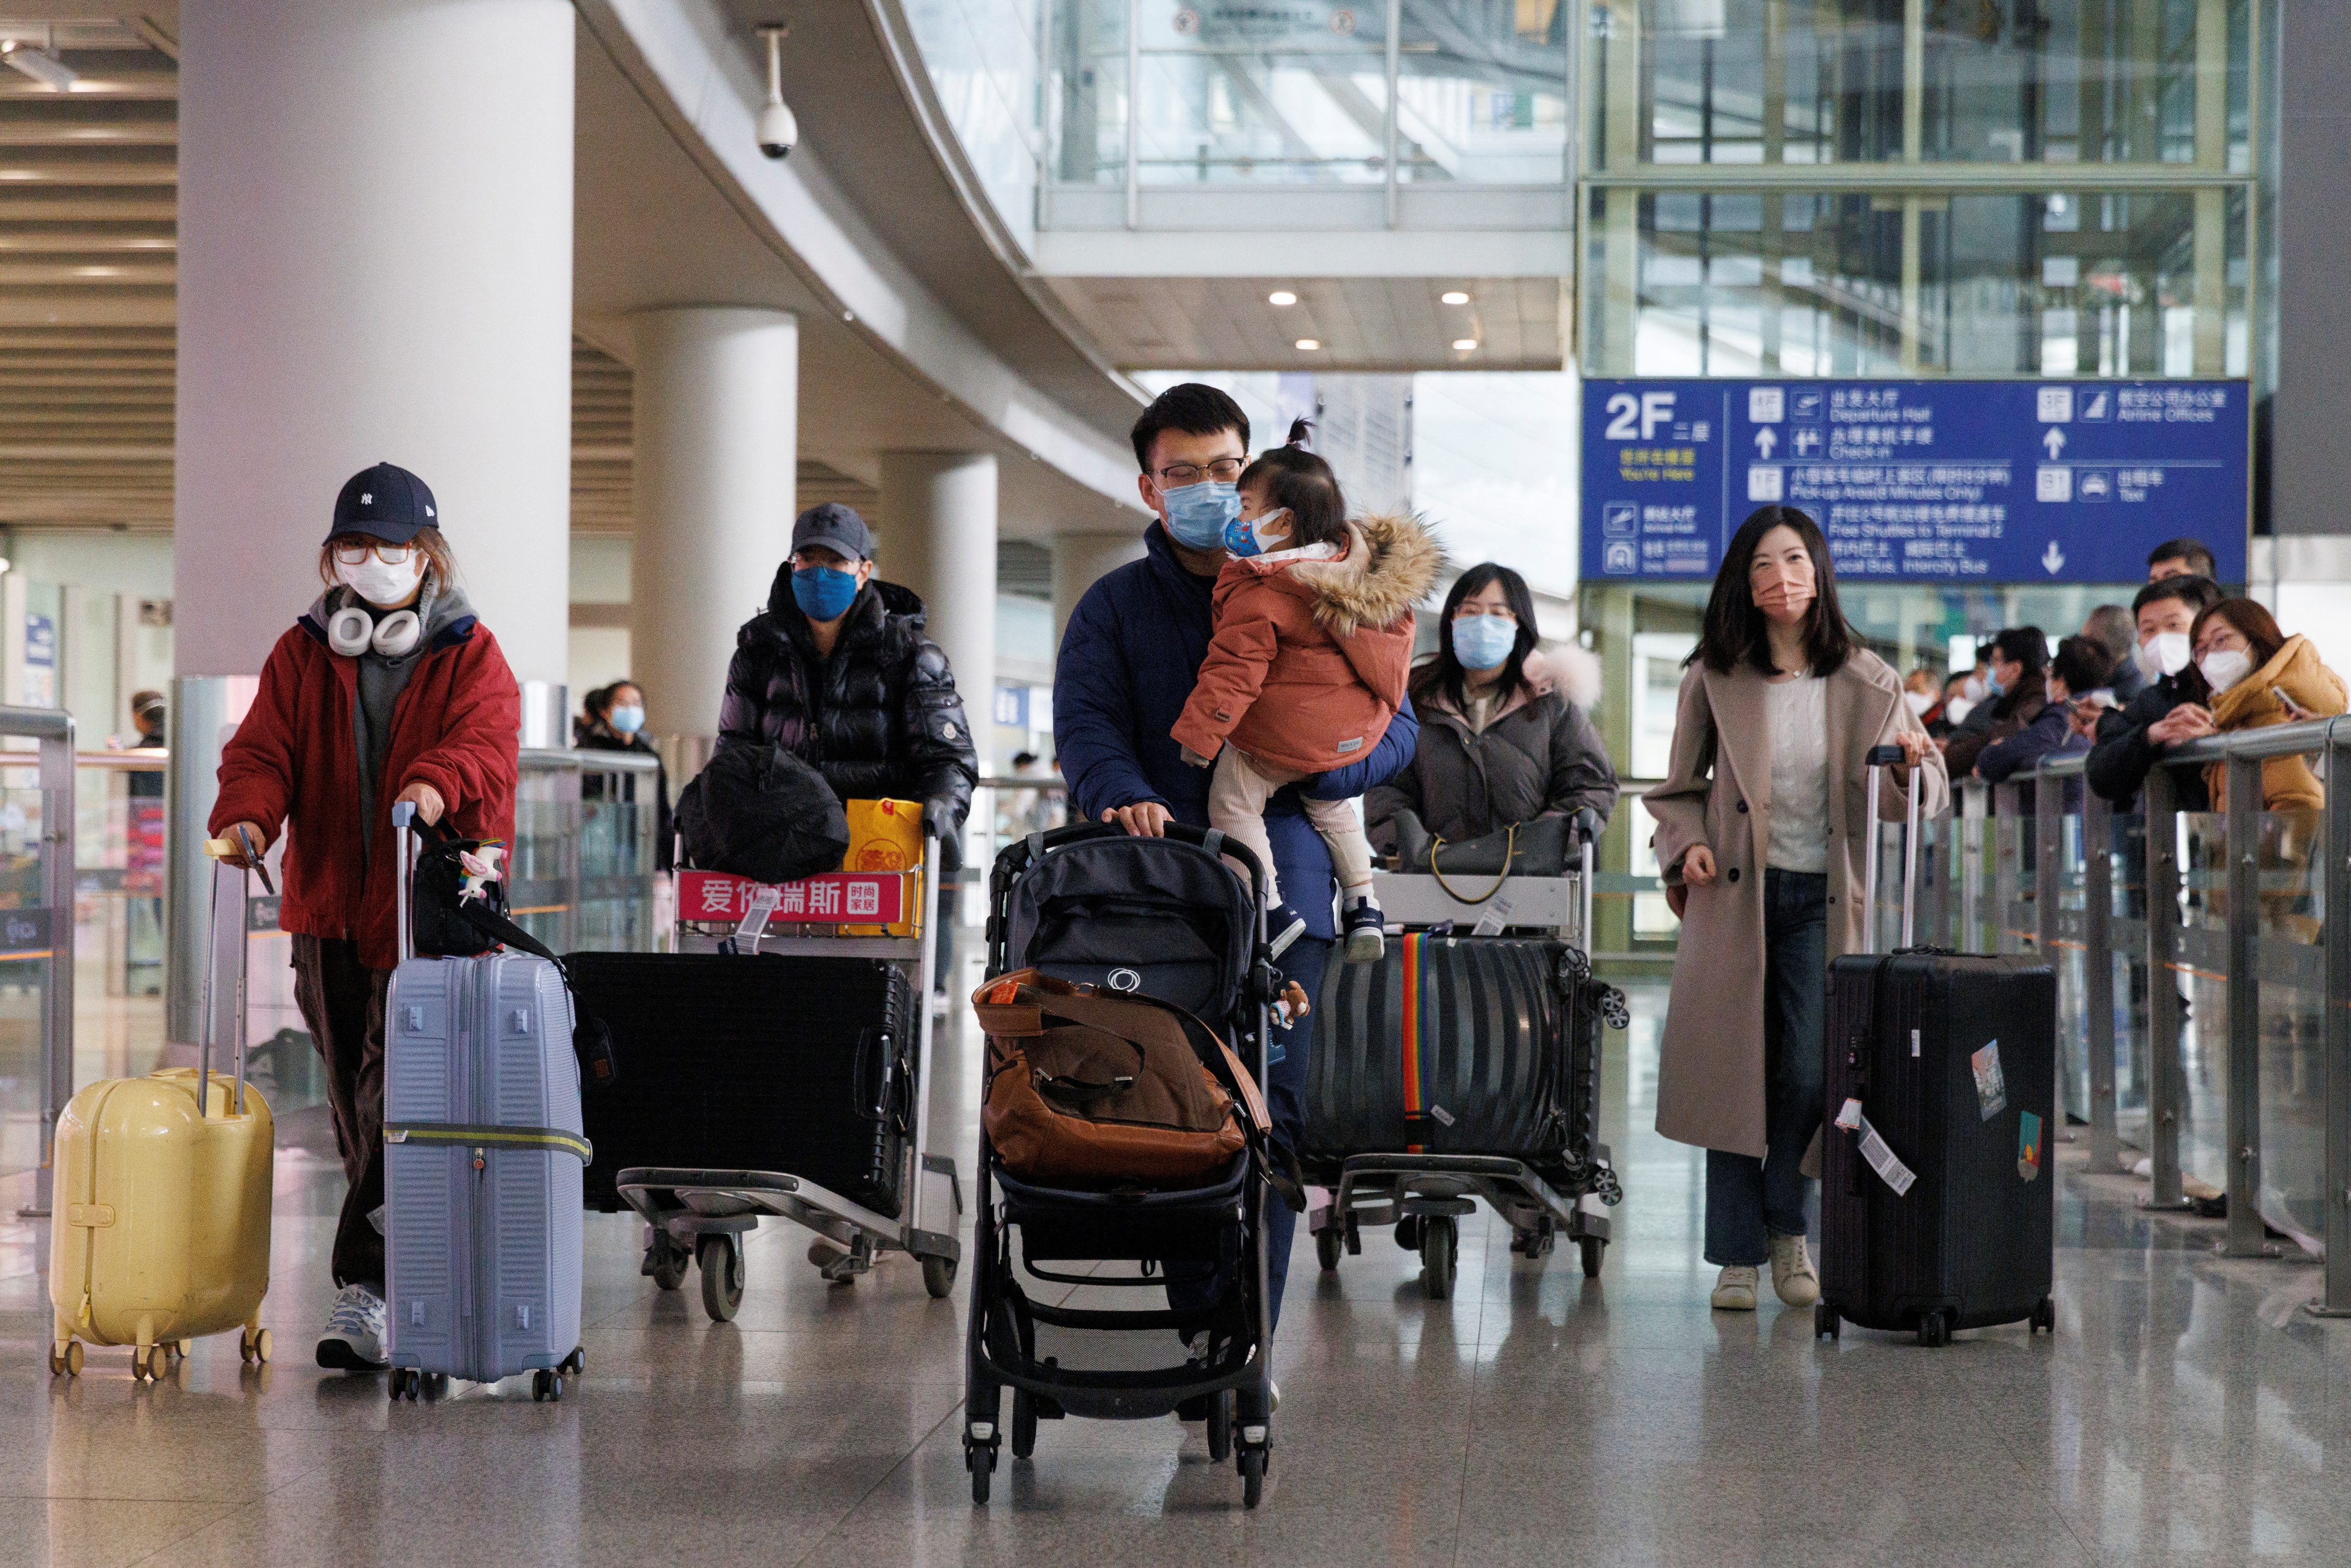 Passengers push their baggage through the international arrivals hall at Beijing Capital International Airport after China lifted COVID-19 quarantine requirements for inbound travelers in Beijing.